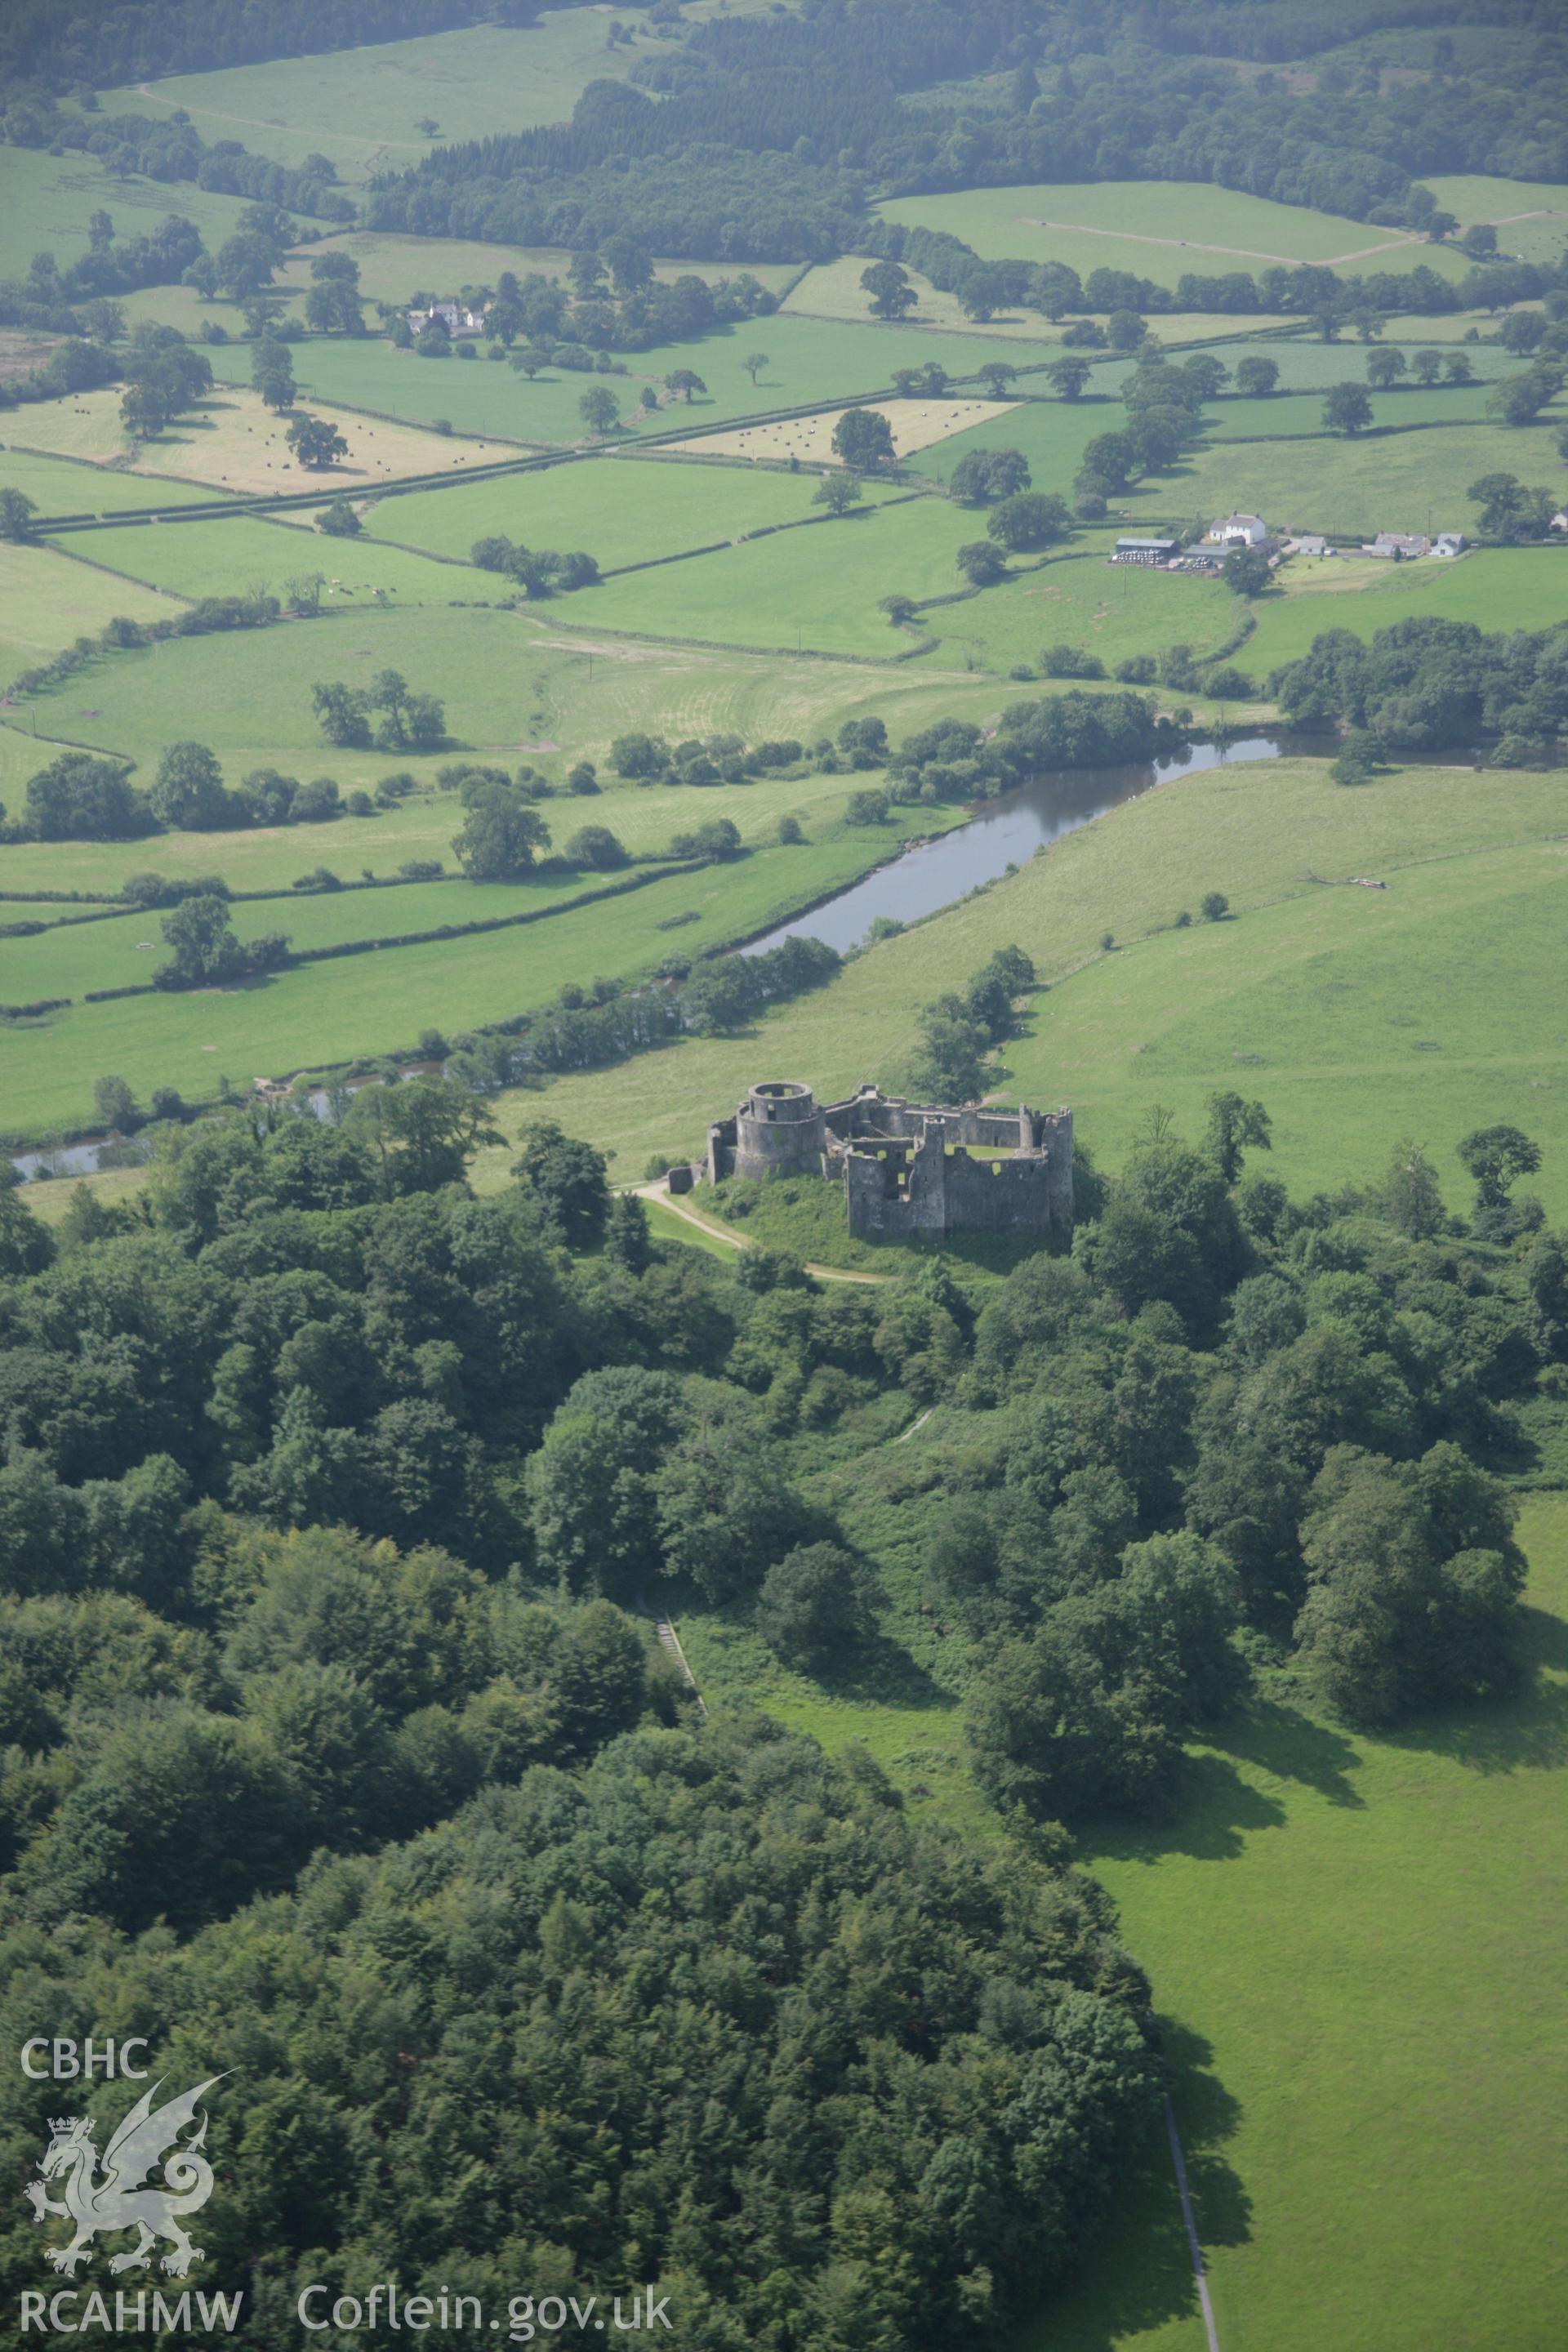 RCAHMW colour oblique aerial photograph of Dinefwr Castle, Llandeilo, from the east. Taken on 11 July 2005 by Toby Driver